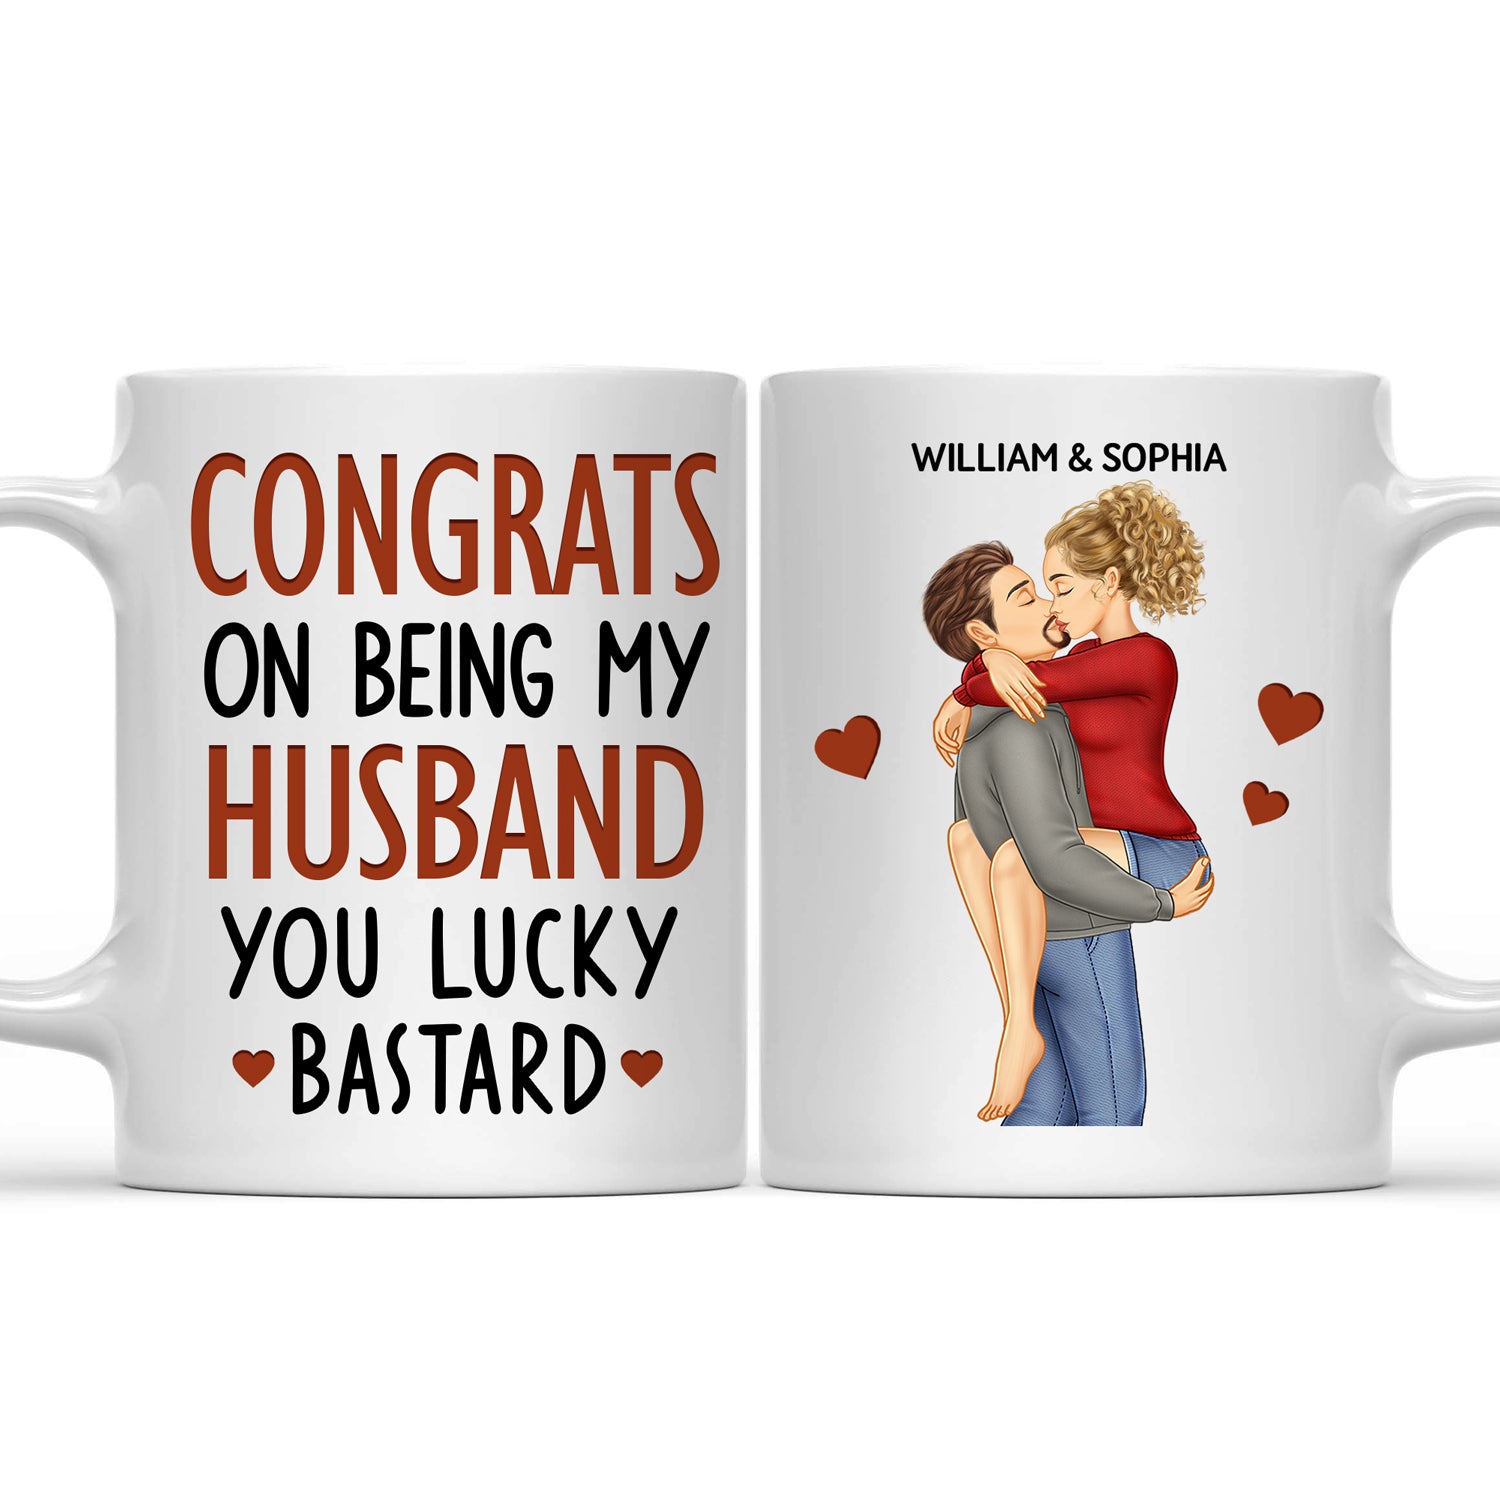 Congrats On Being My Husband Kissing Couple - Anniversary, Vacation, Funny Gift For Couples, Family - Personalized Mug